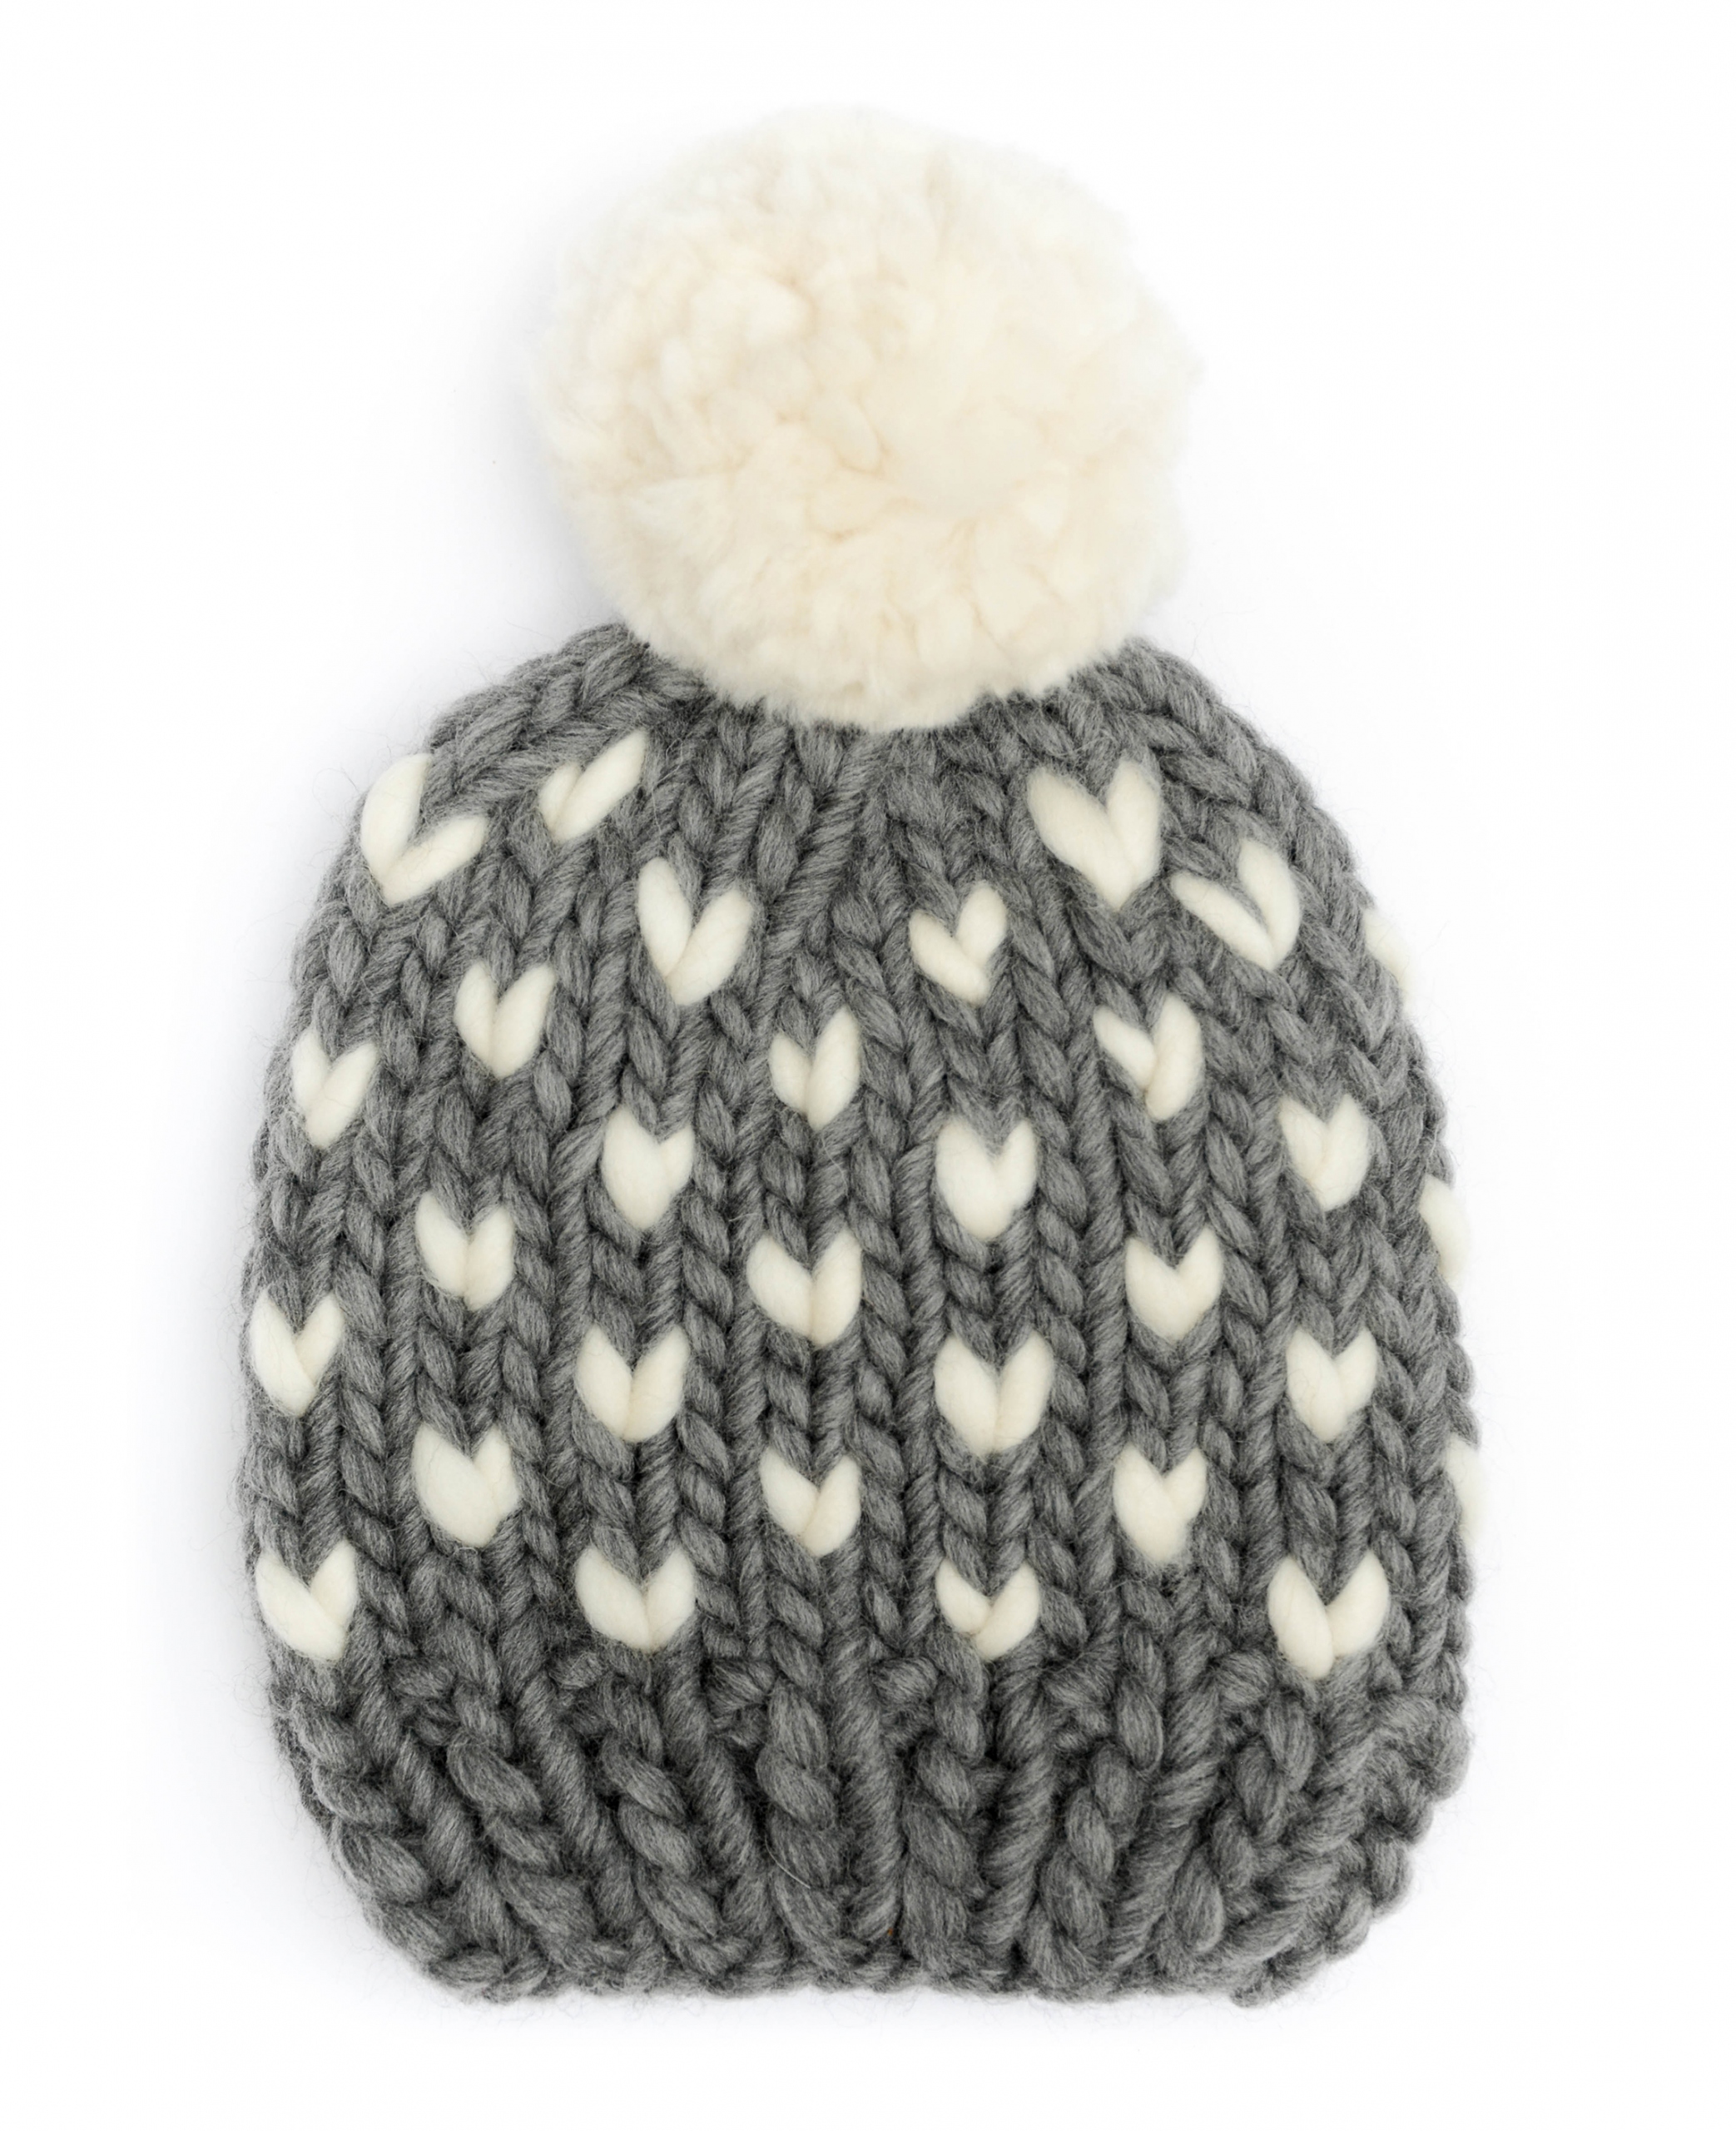 Handmade wool hats - Grey bobble hat with Ivory heart detail and pom pom. Click to customise.